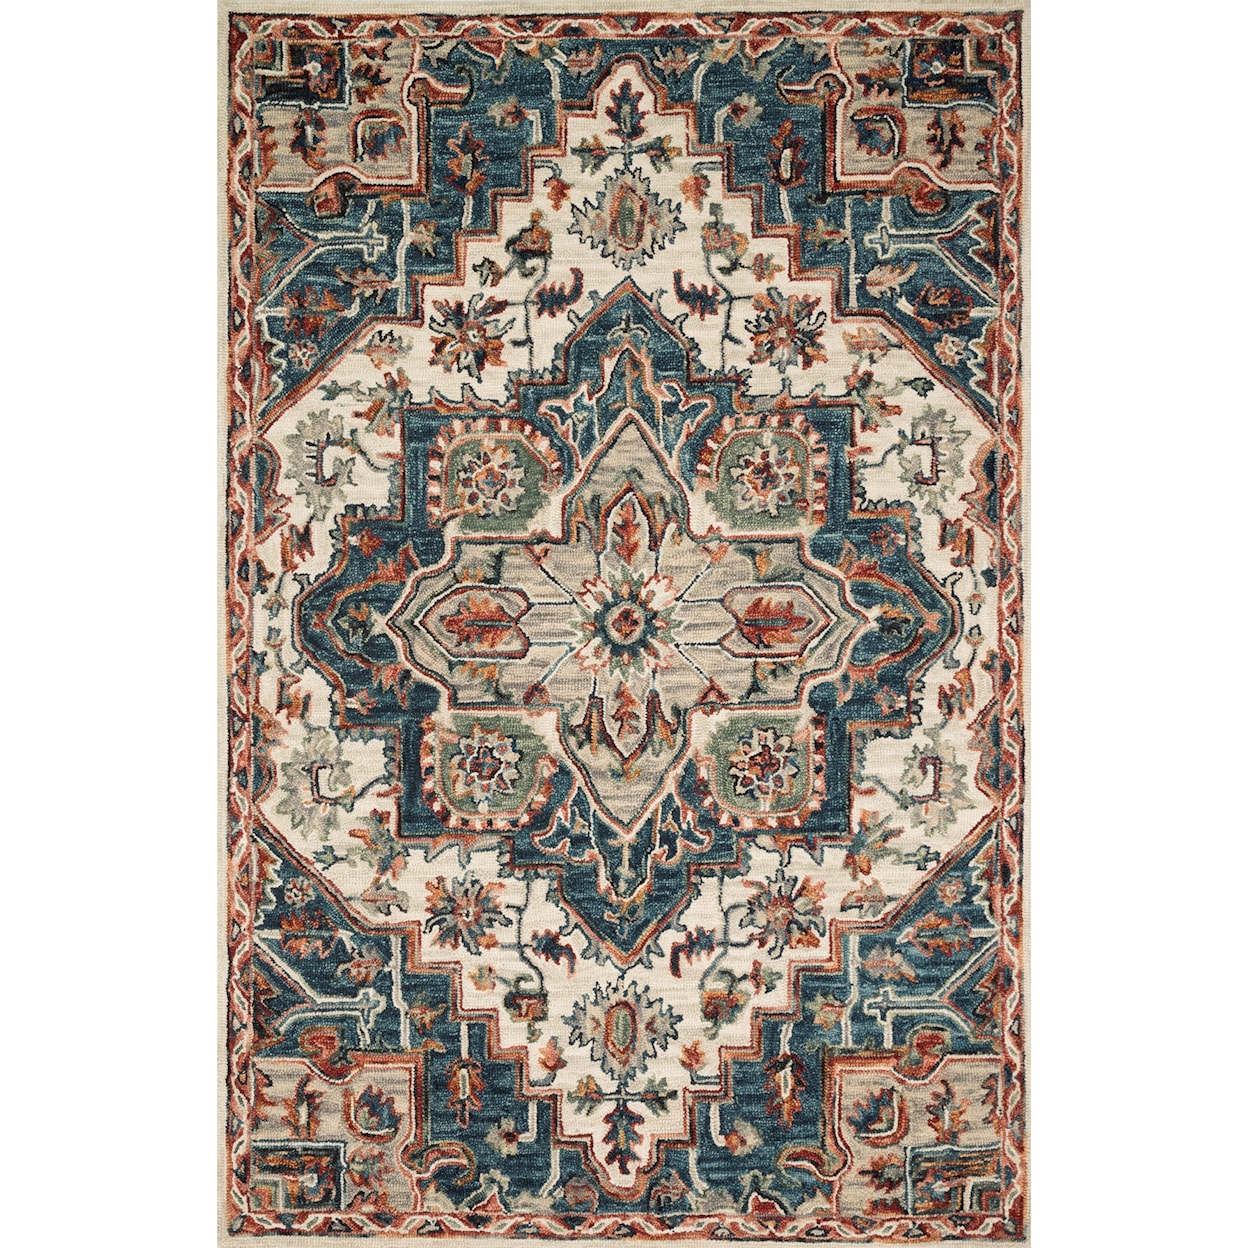 Reeds Rugs Victoria 9'3" x 13' Blue / Red Rug